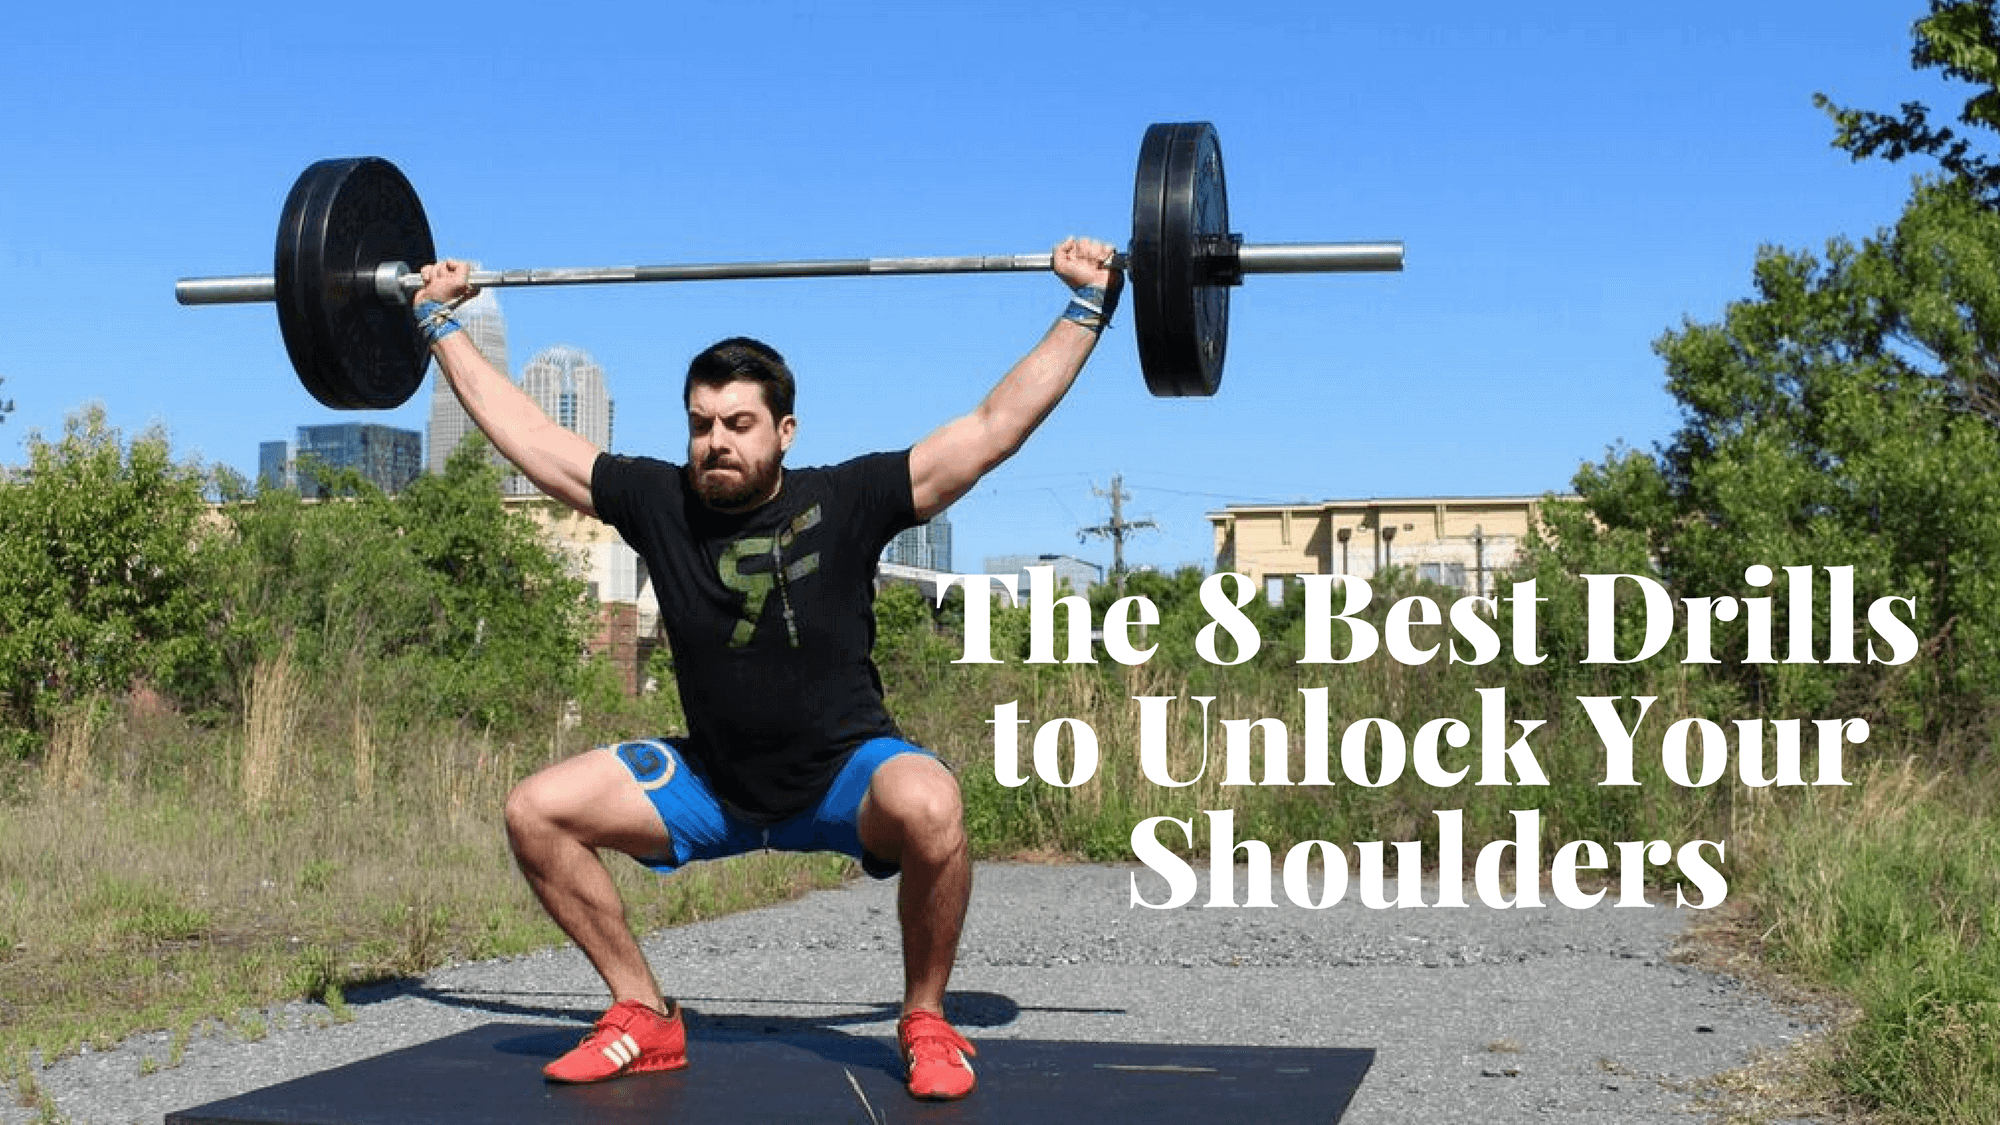 Featured image for “The 8 Best Drills to Unlock Your Shoulder Mobility”